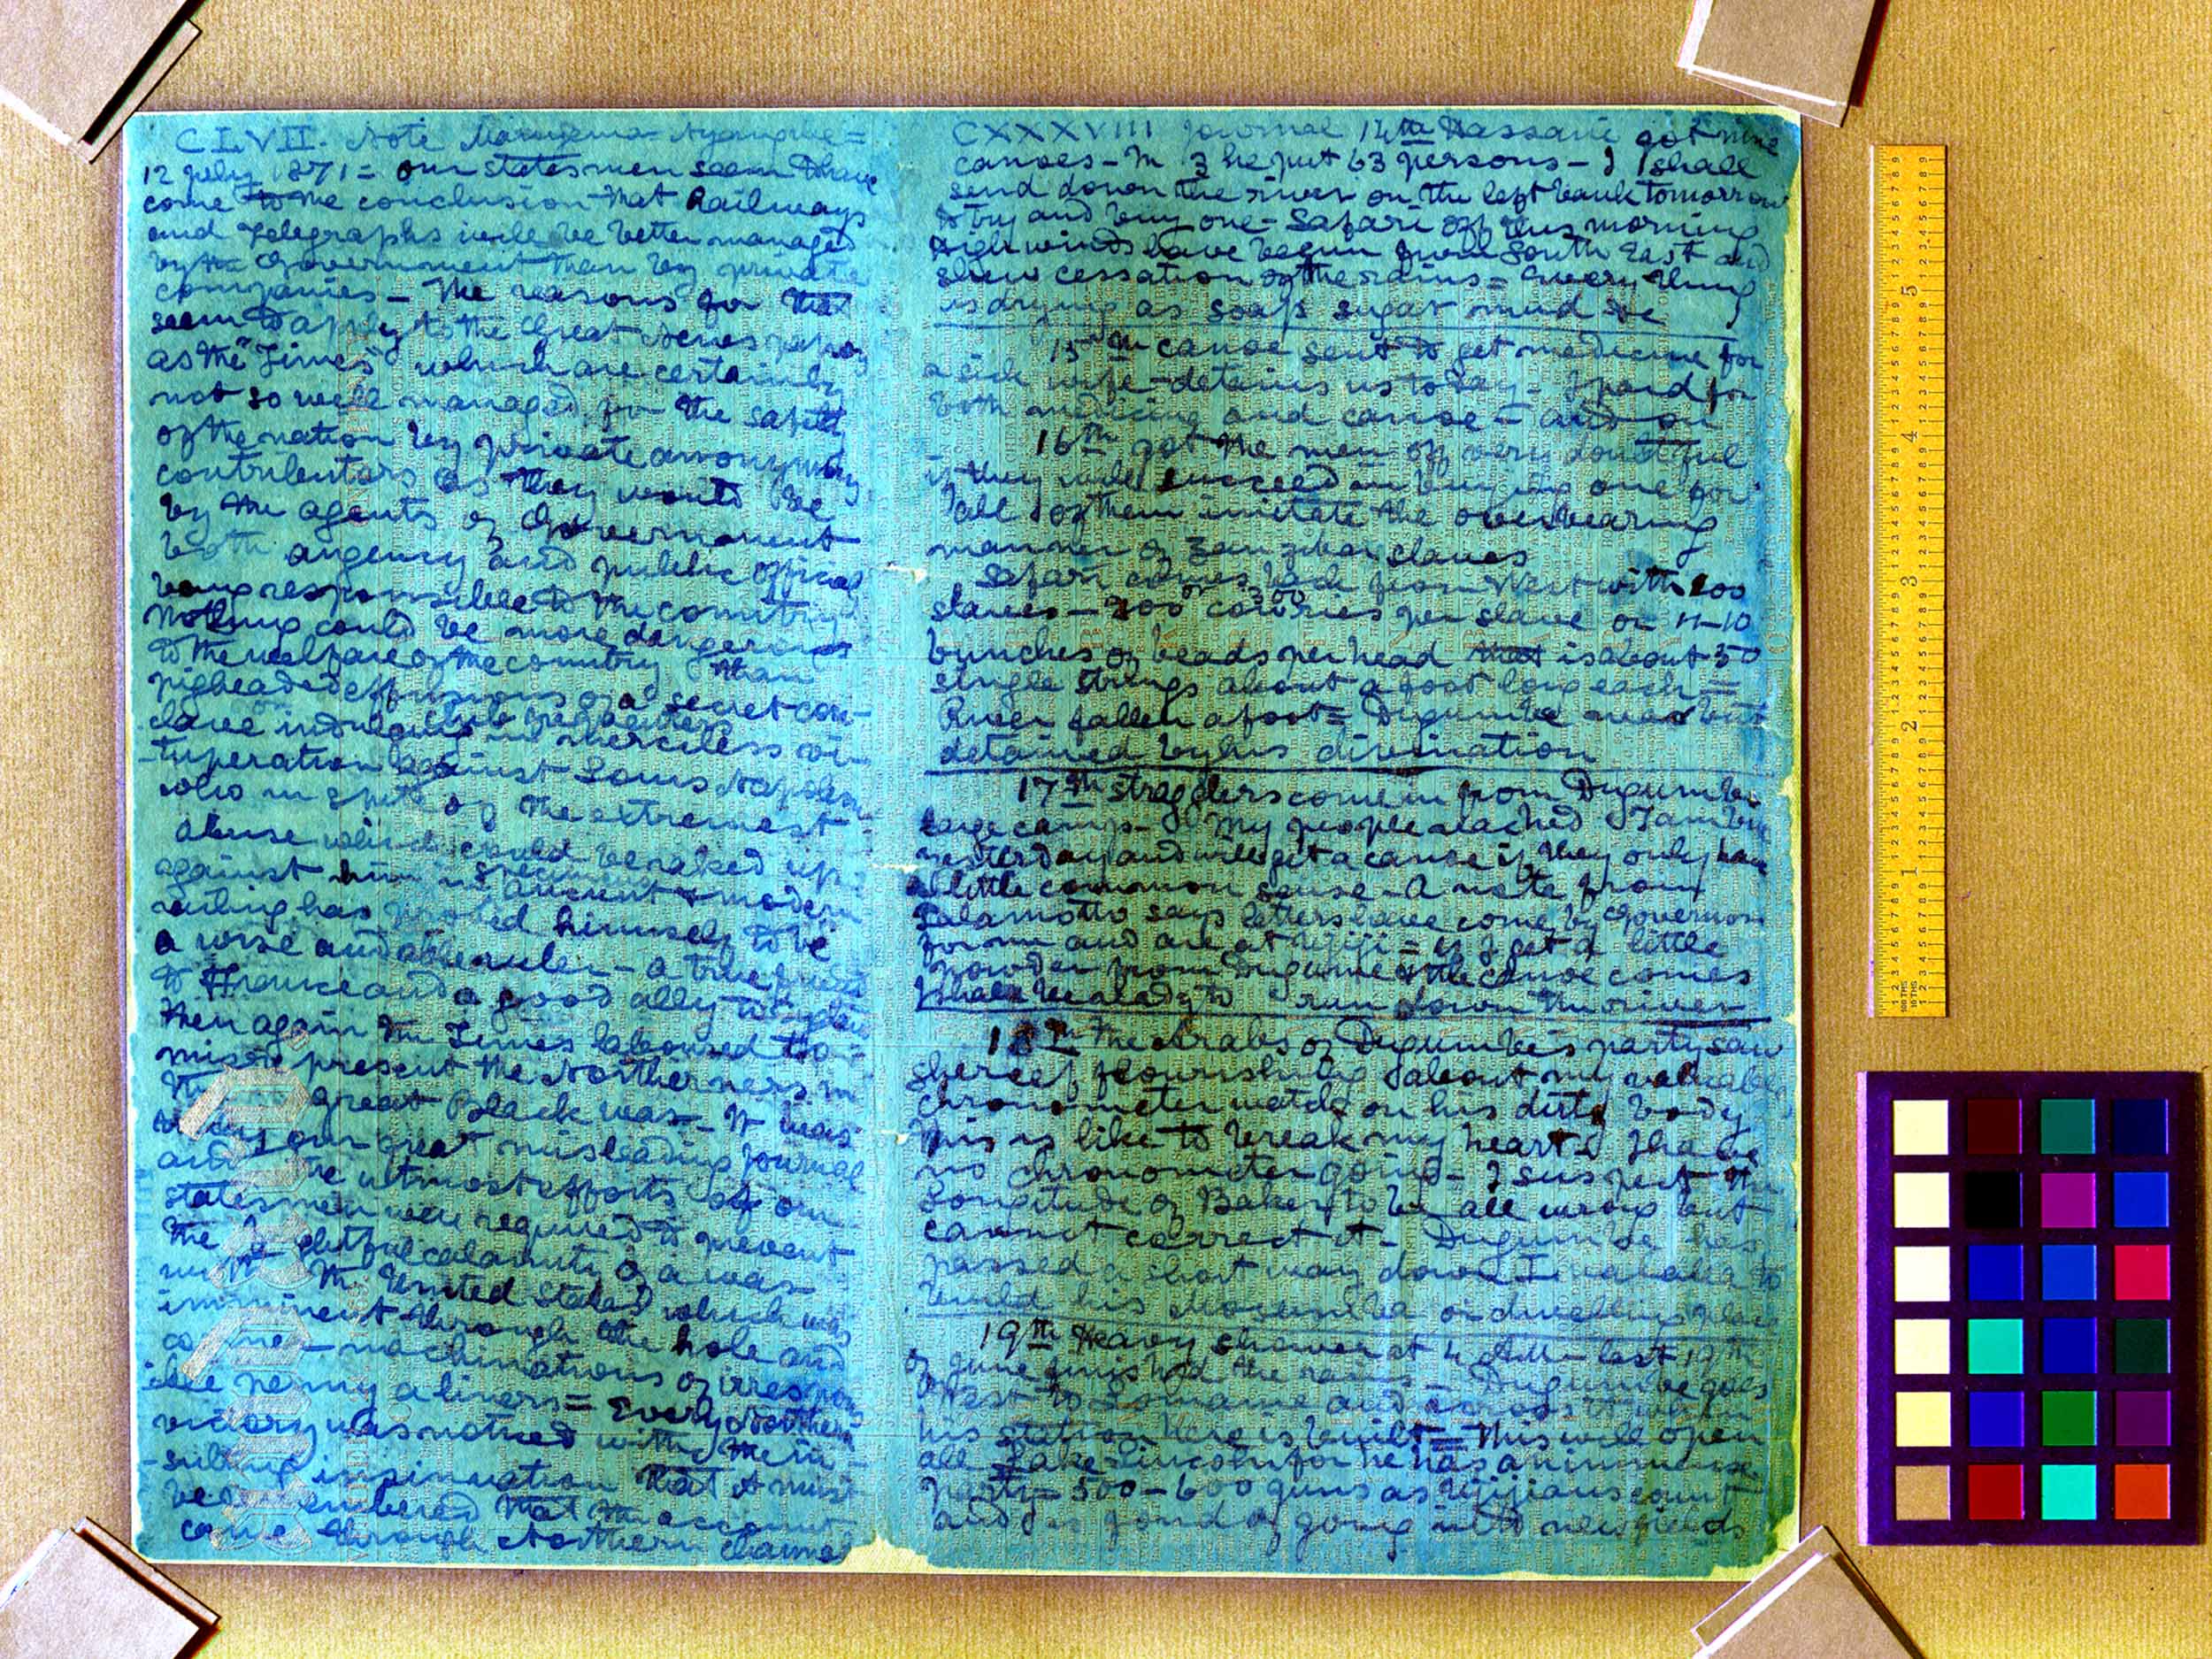 A processed spectral image of a page from David Livingstone's 1871 Field Diary. Copyright David Livingstone Centre and Dr. Neil Imray Livingstone Wilson. Creative Commons Attribution-NonCommercial 3.0 Unported (https://creativecommons.org/licenses/by-nc/3.0/)